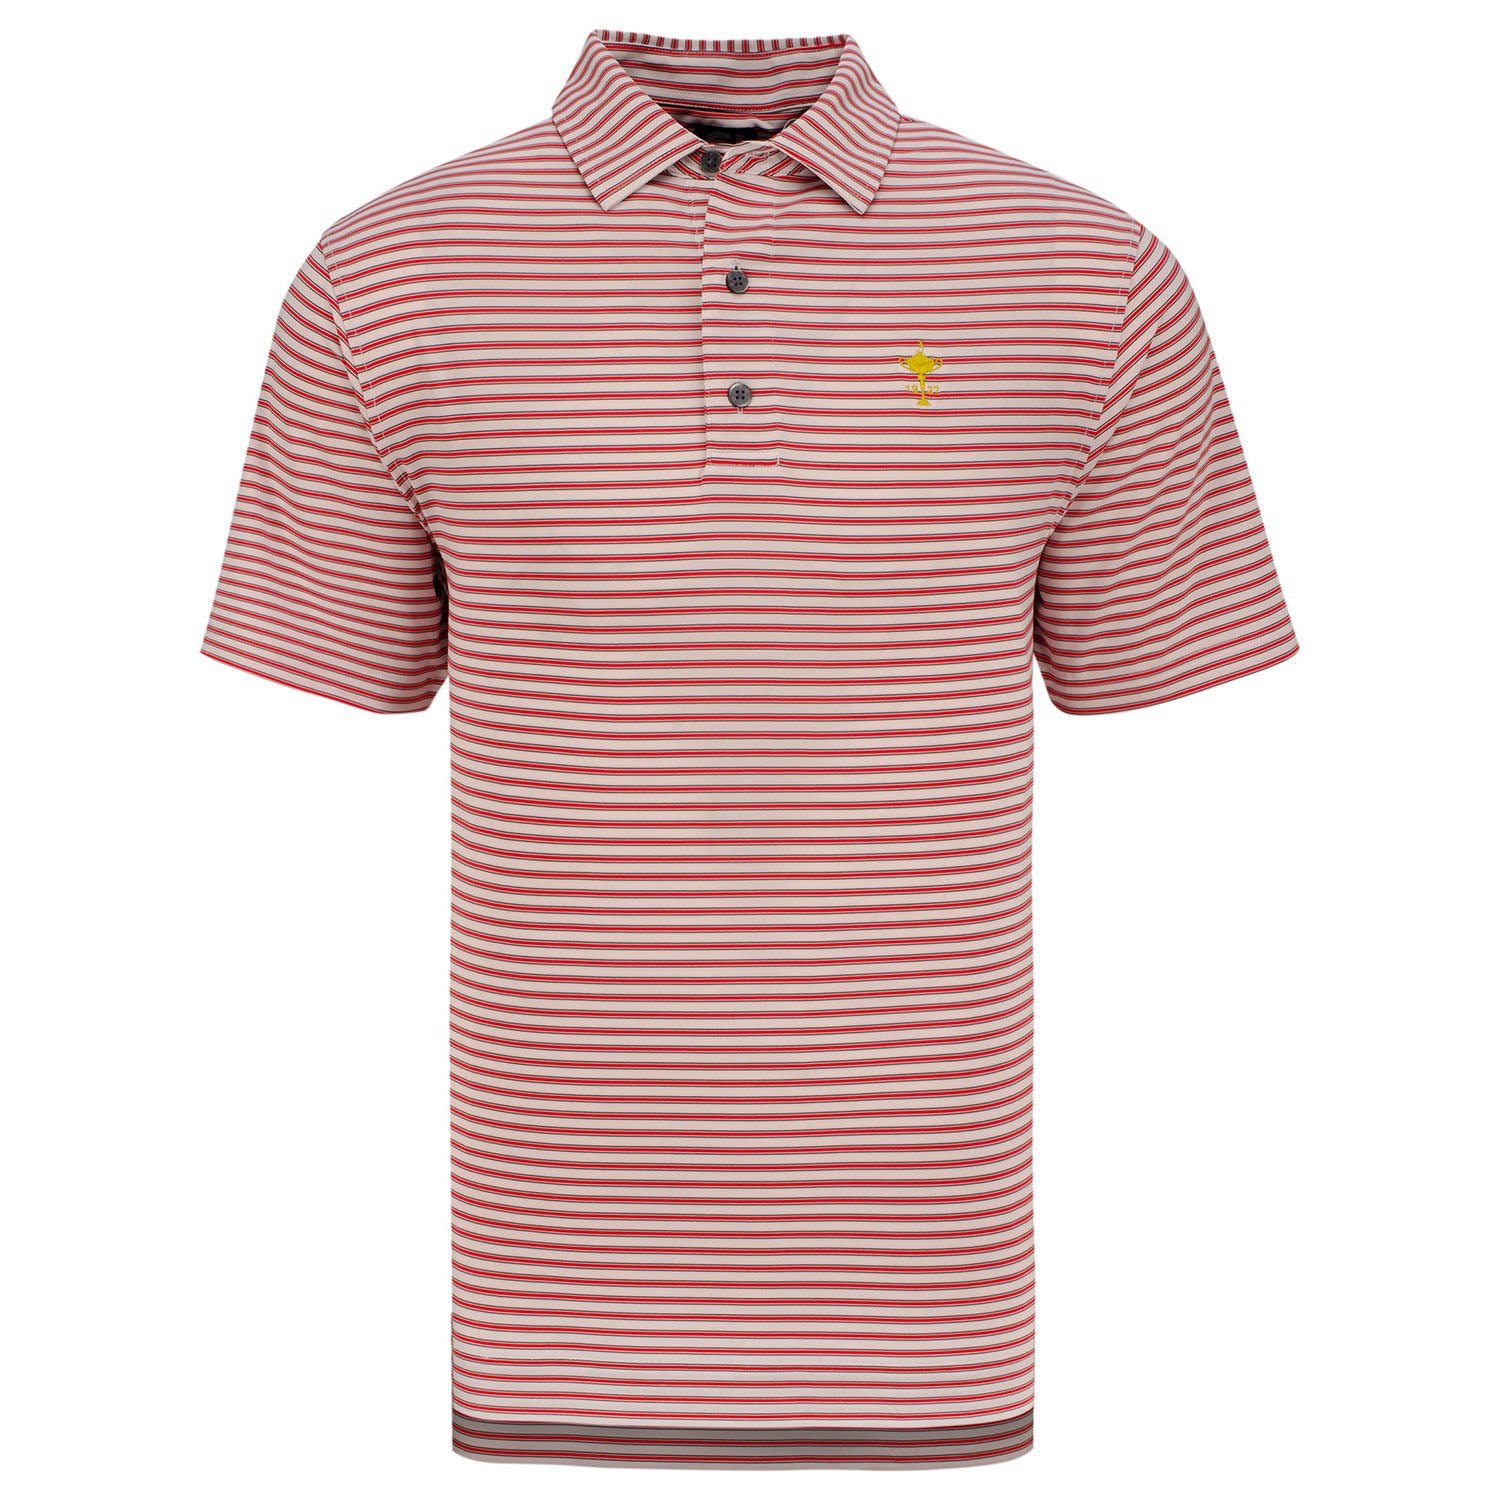 FootJoy Stretch Pinstripe Polo in Red and White- Front View